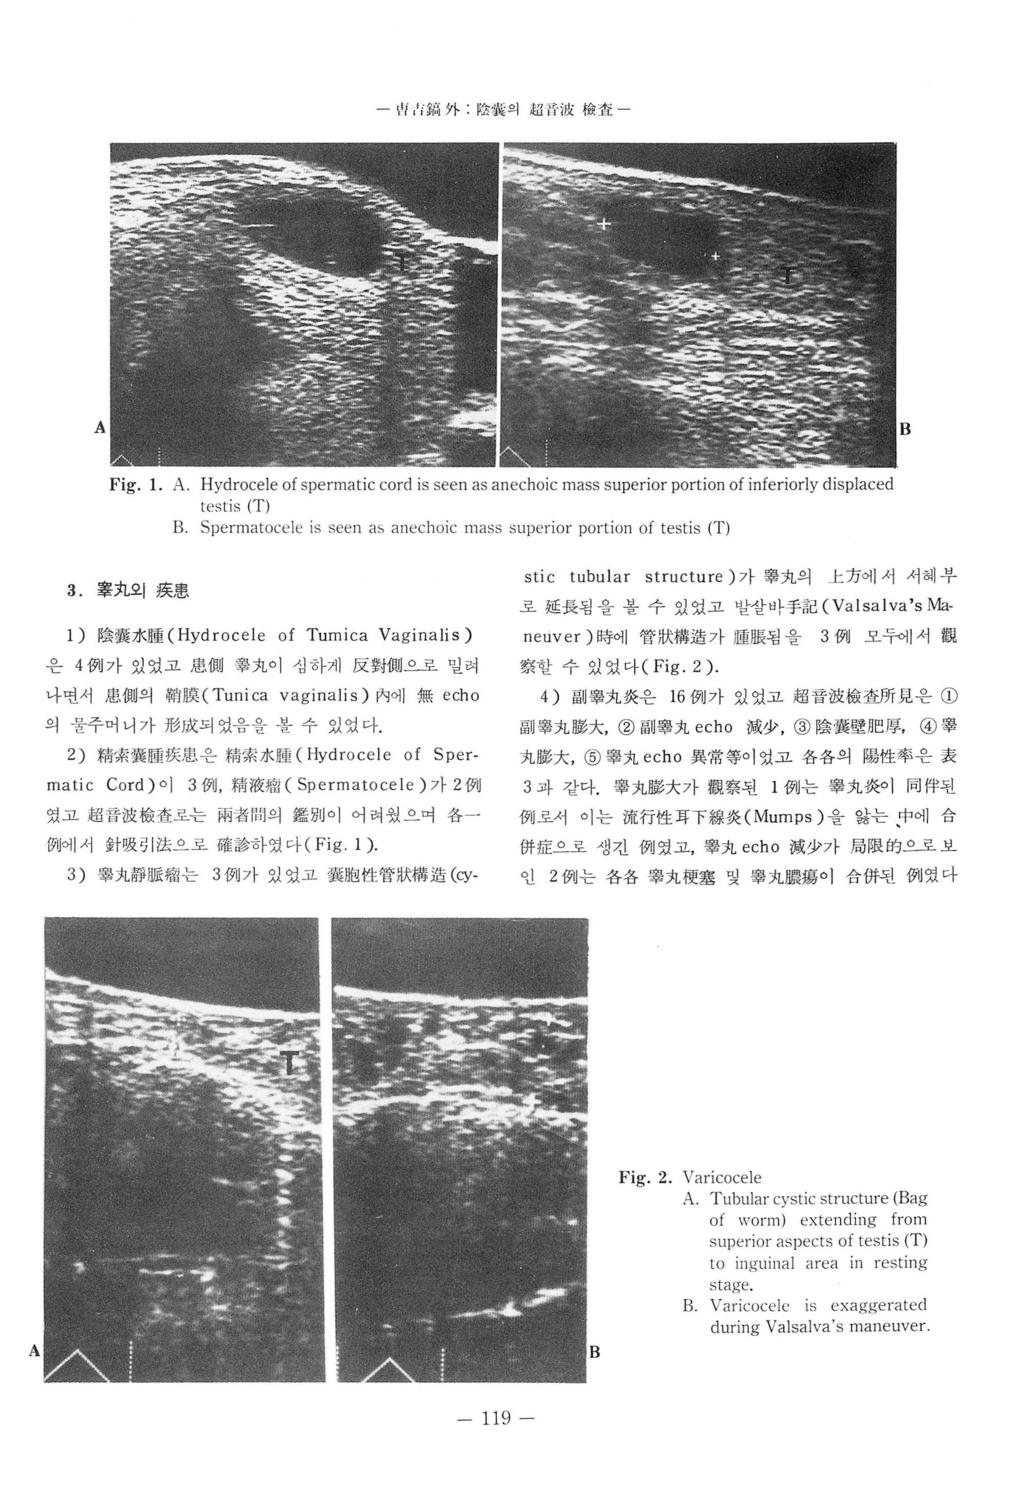 - 씨, l 혜外, 앉싫의,w 히 ilji îft 짚 - A B Fig. 1. A. Hydrocele of spermatic cord is seen as anechoic mass superior portion of inferiorly displaced testis (T) B.